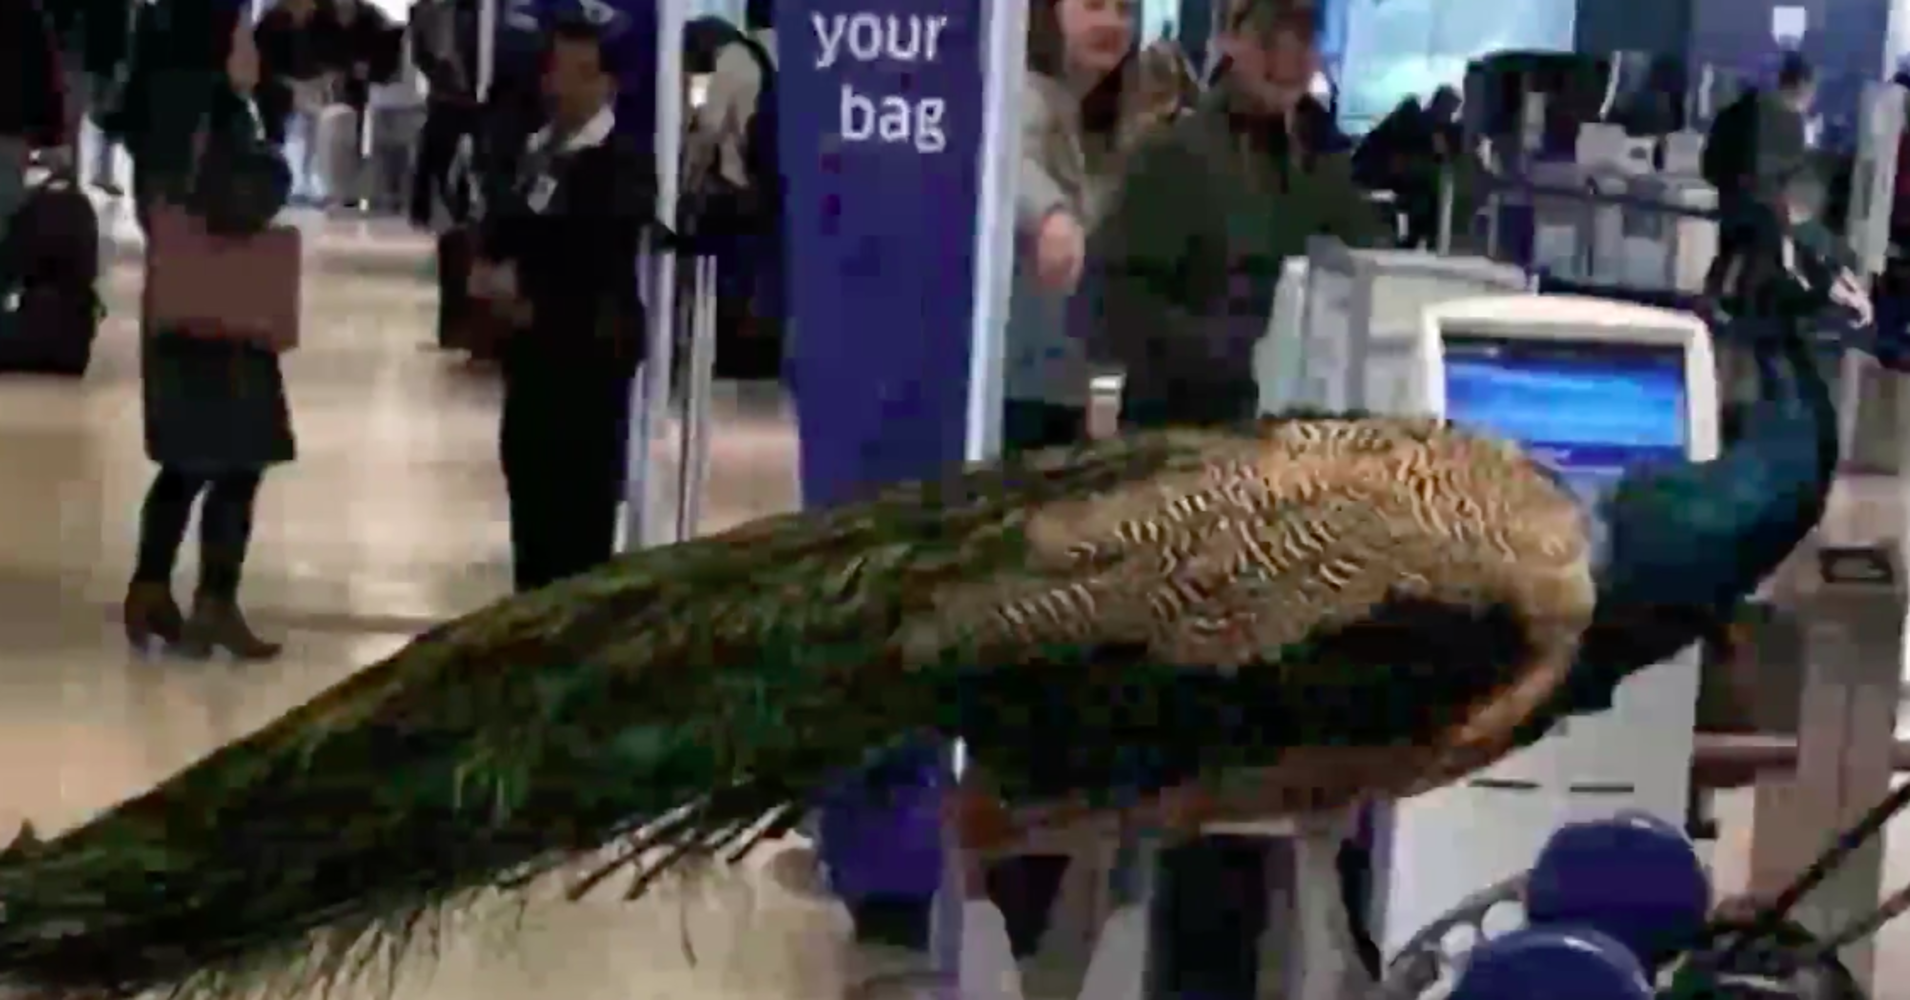 Artist and her emotional support peacock were denied entry on flight